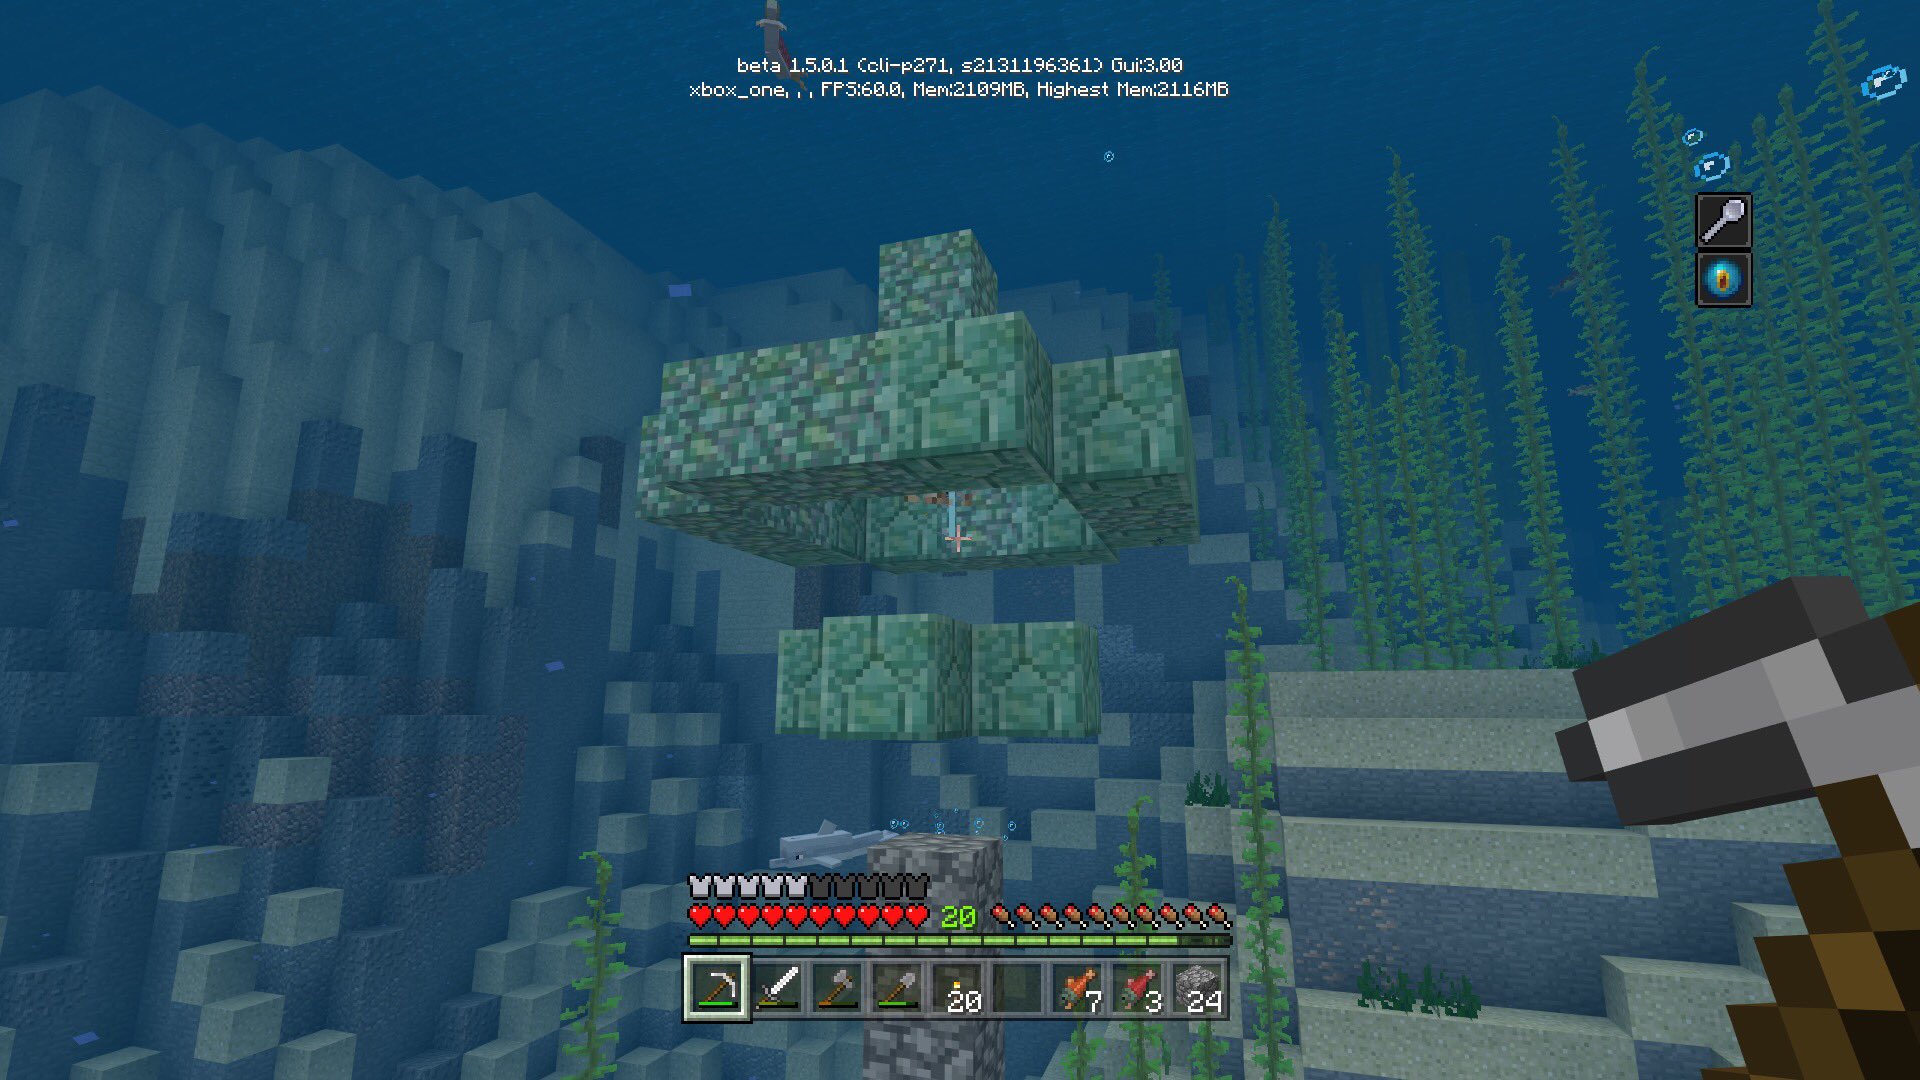 Minecraft News on Twitter: "Played #Minecraft Update Aquatic on Xbox today  and managed to gather the resources in Survival for the Conduit! :)  https://t.co/gfqLctquCd" / Twitter